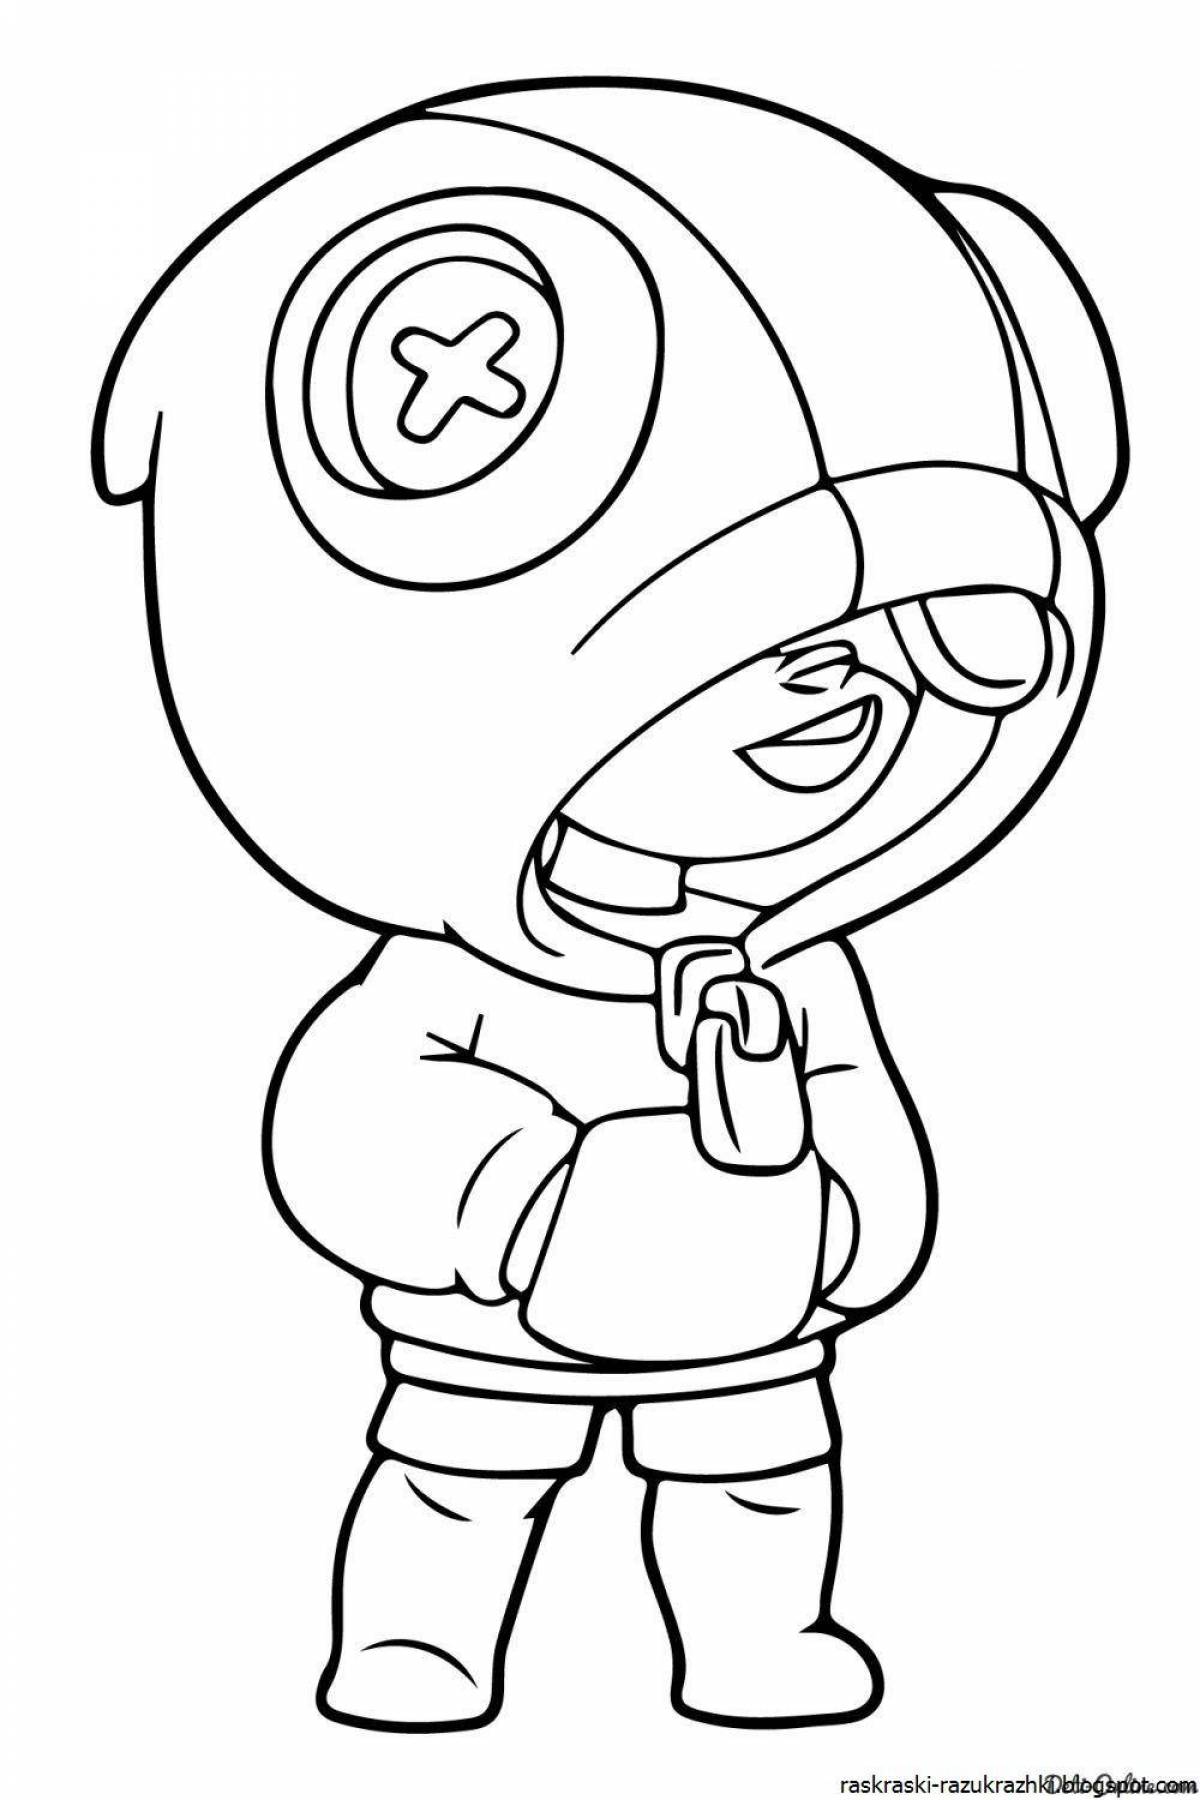 Hypnotic brown stars coloring page